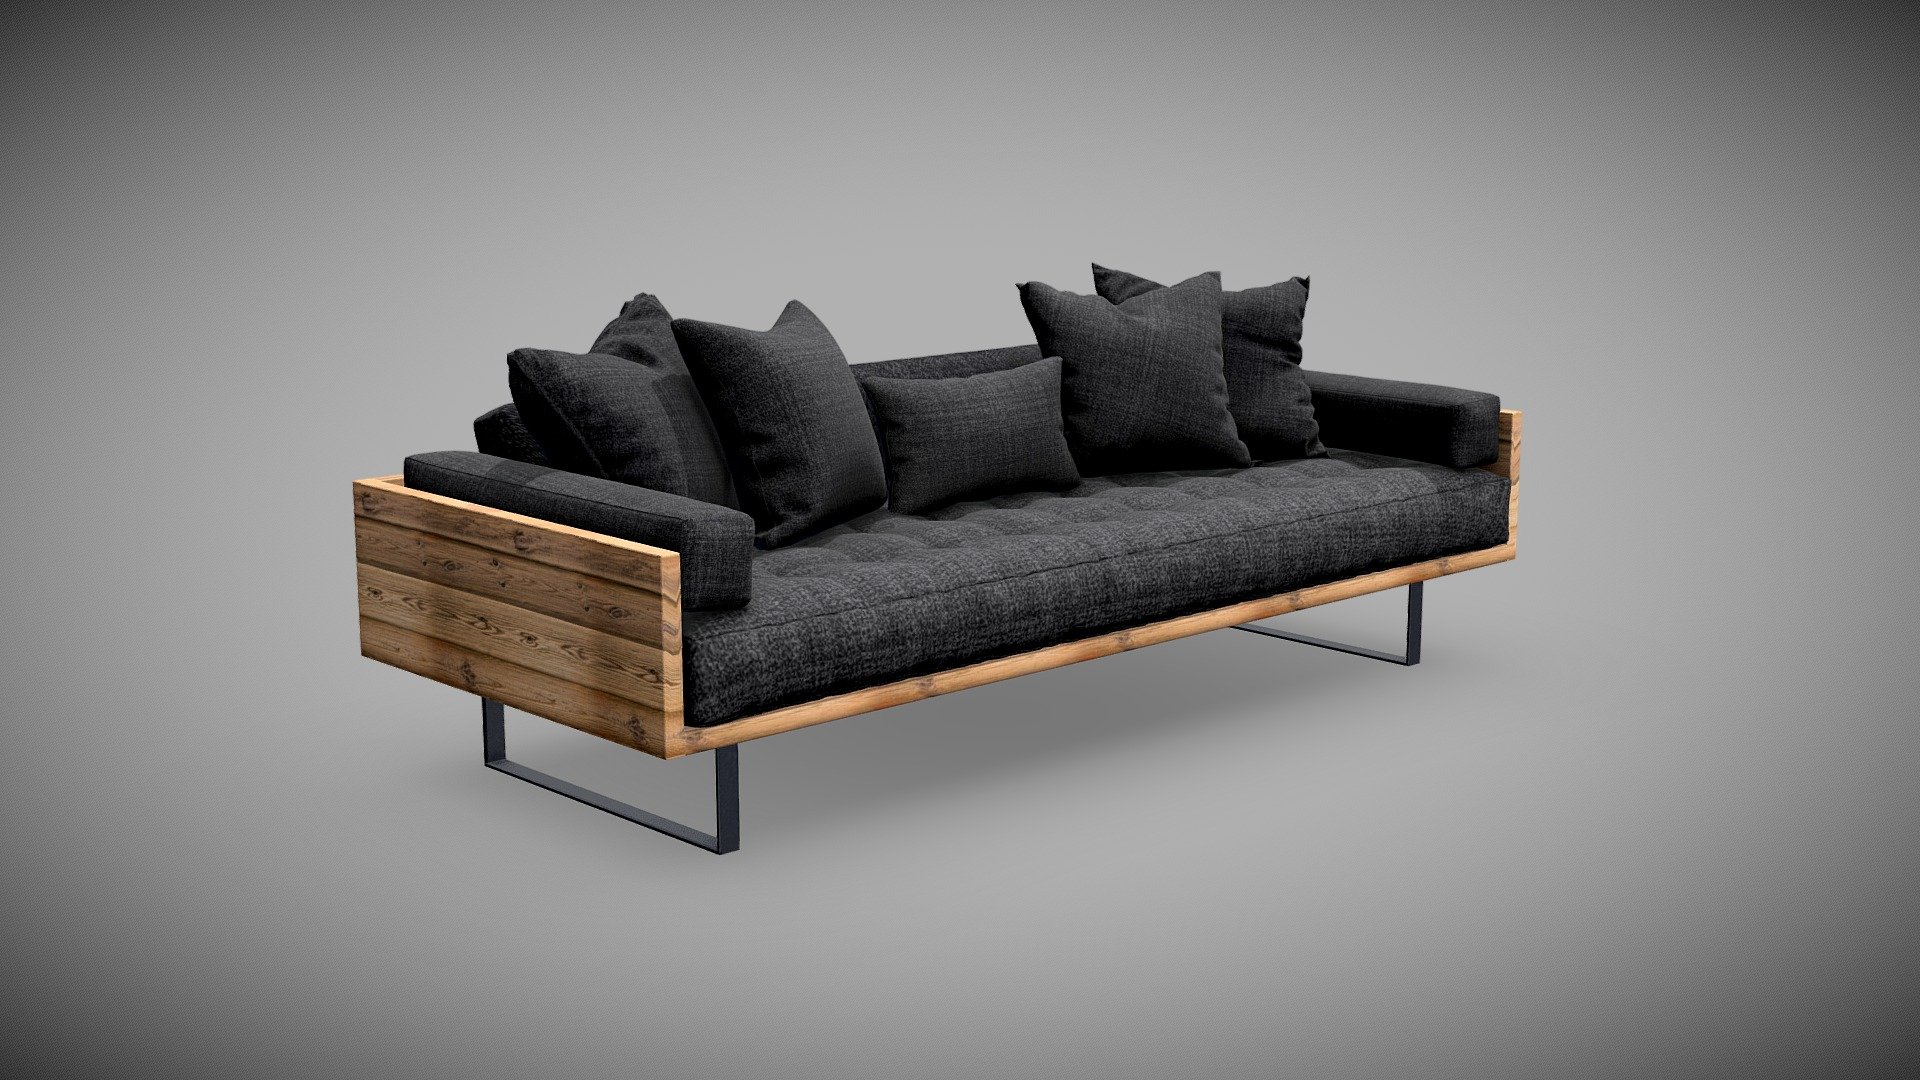 3D Sofa Set.
PBR Pipeline based textures included.
Perfect for Unreal Engine, 3Ds max, Maya, Vray, Arnold etc.
Contact for any color changes 3d model